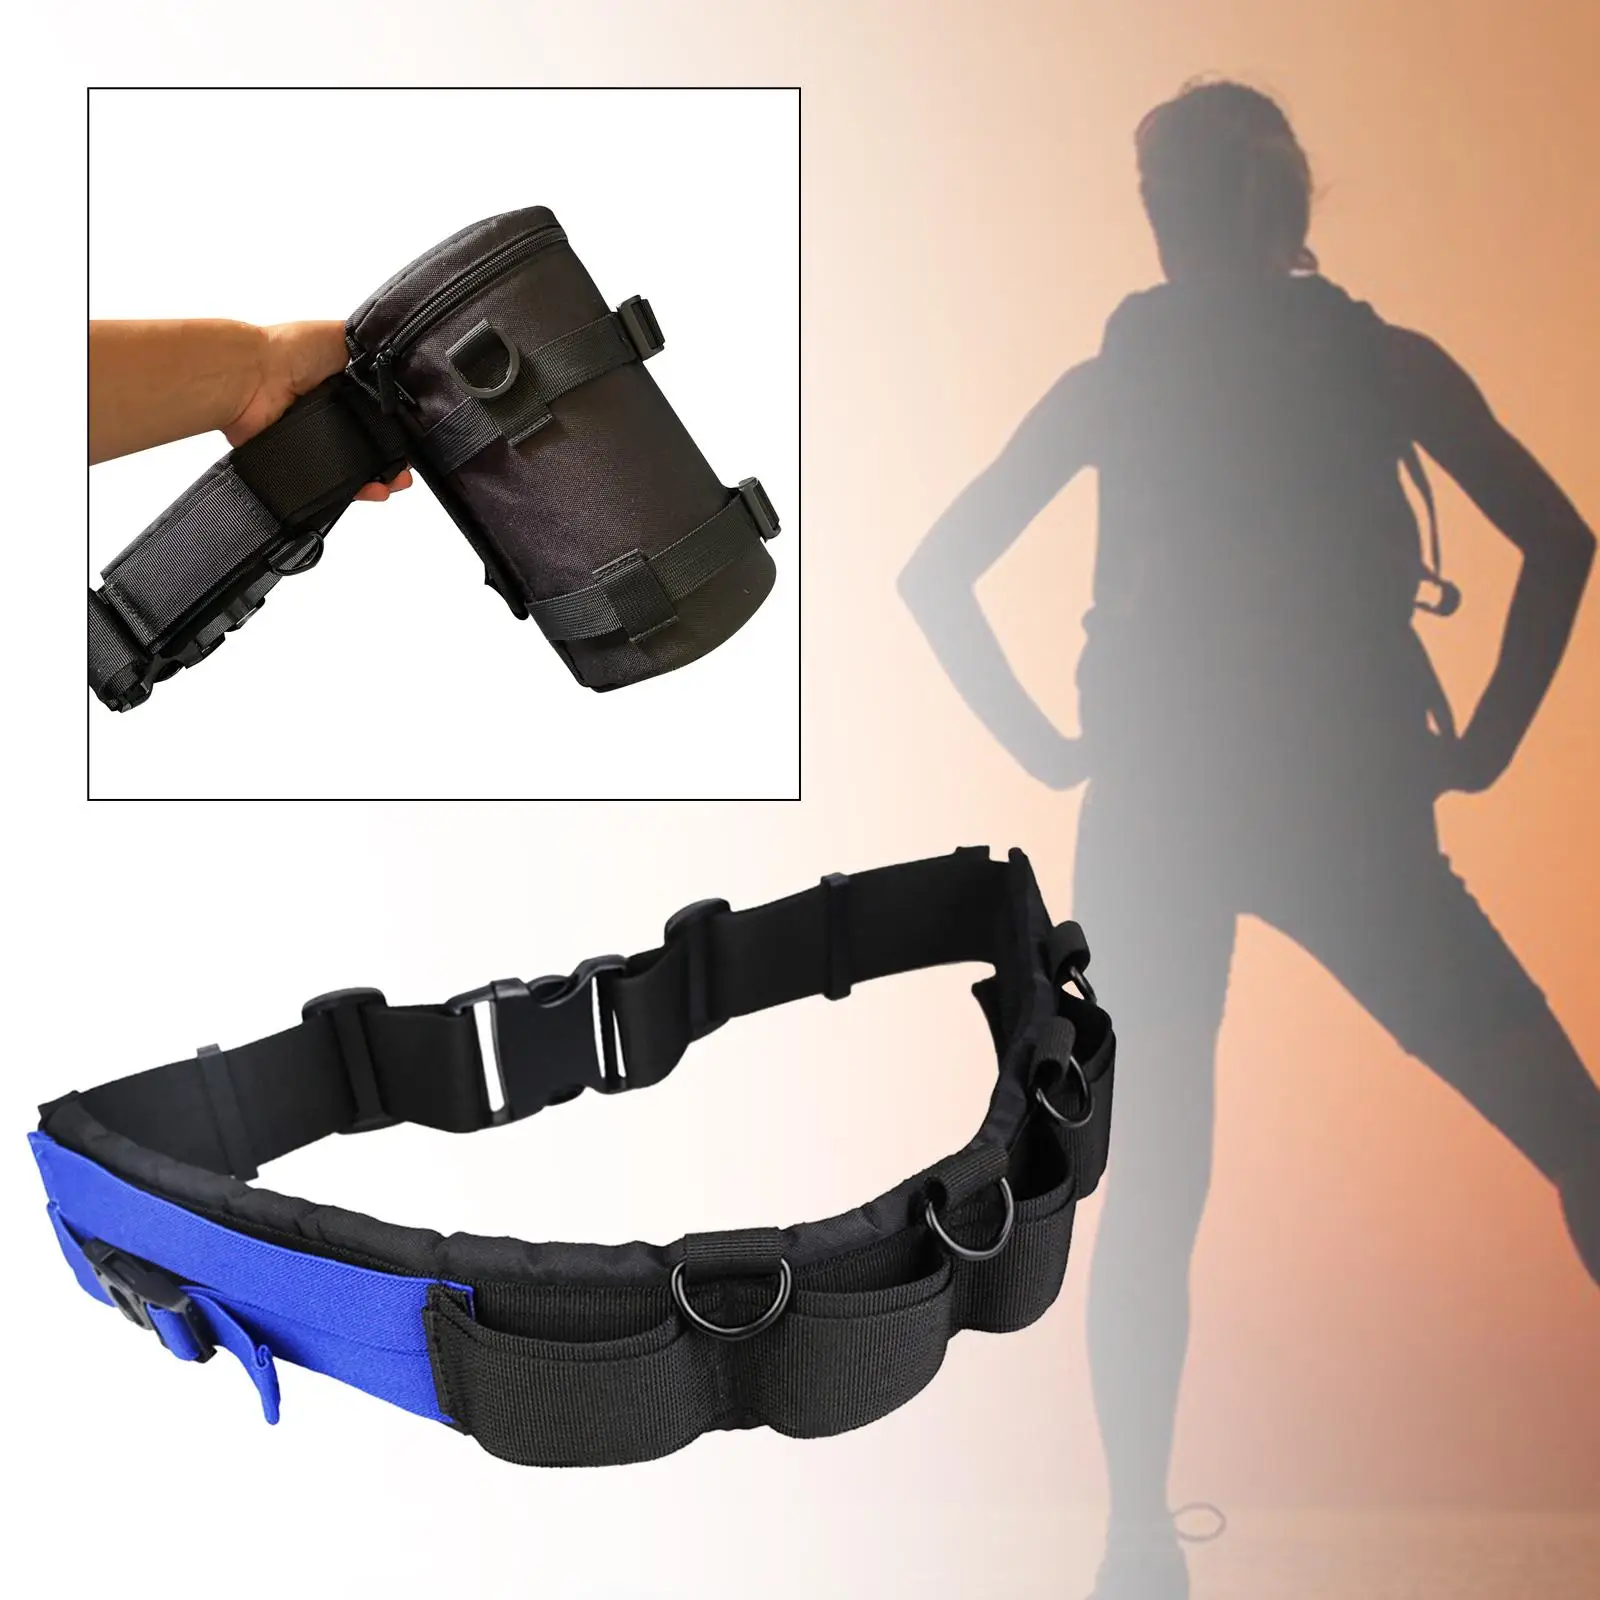 Camera Waist Belt Strap for Hanging Lens Pouch Camera Hang Strap with Hook Photography Belt for Outdoor Men Women Mountaineering